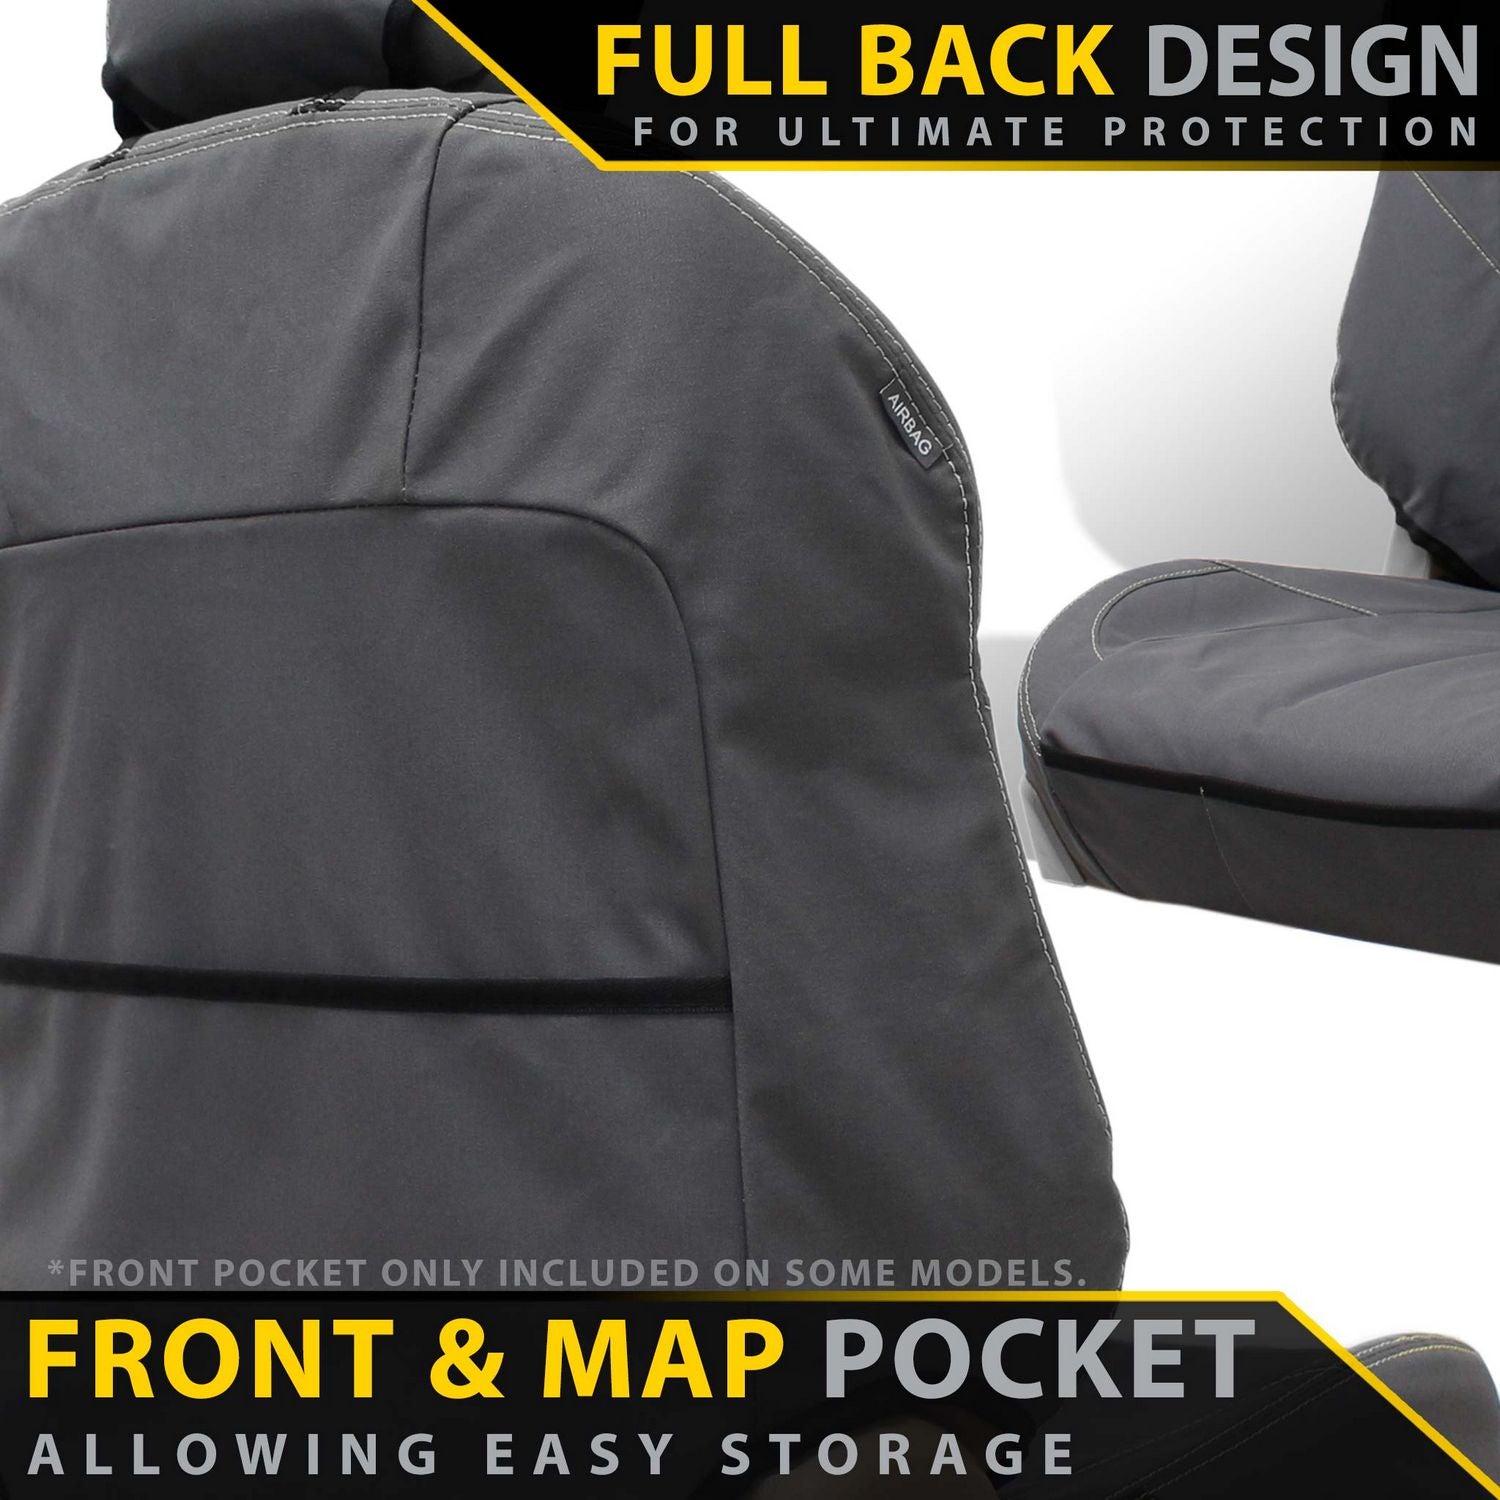 Isuzu D-MAX RT XP6 Tough Canvas 2x Front Seat Covers (Available)